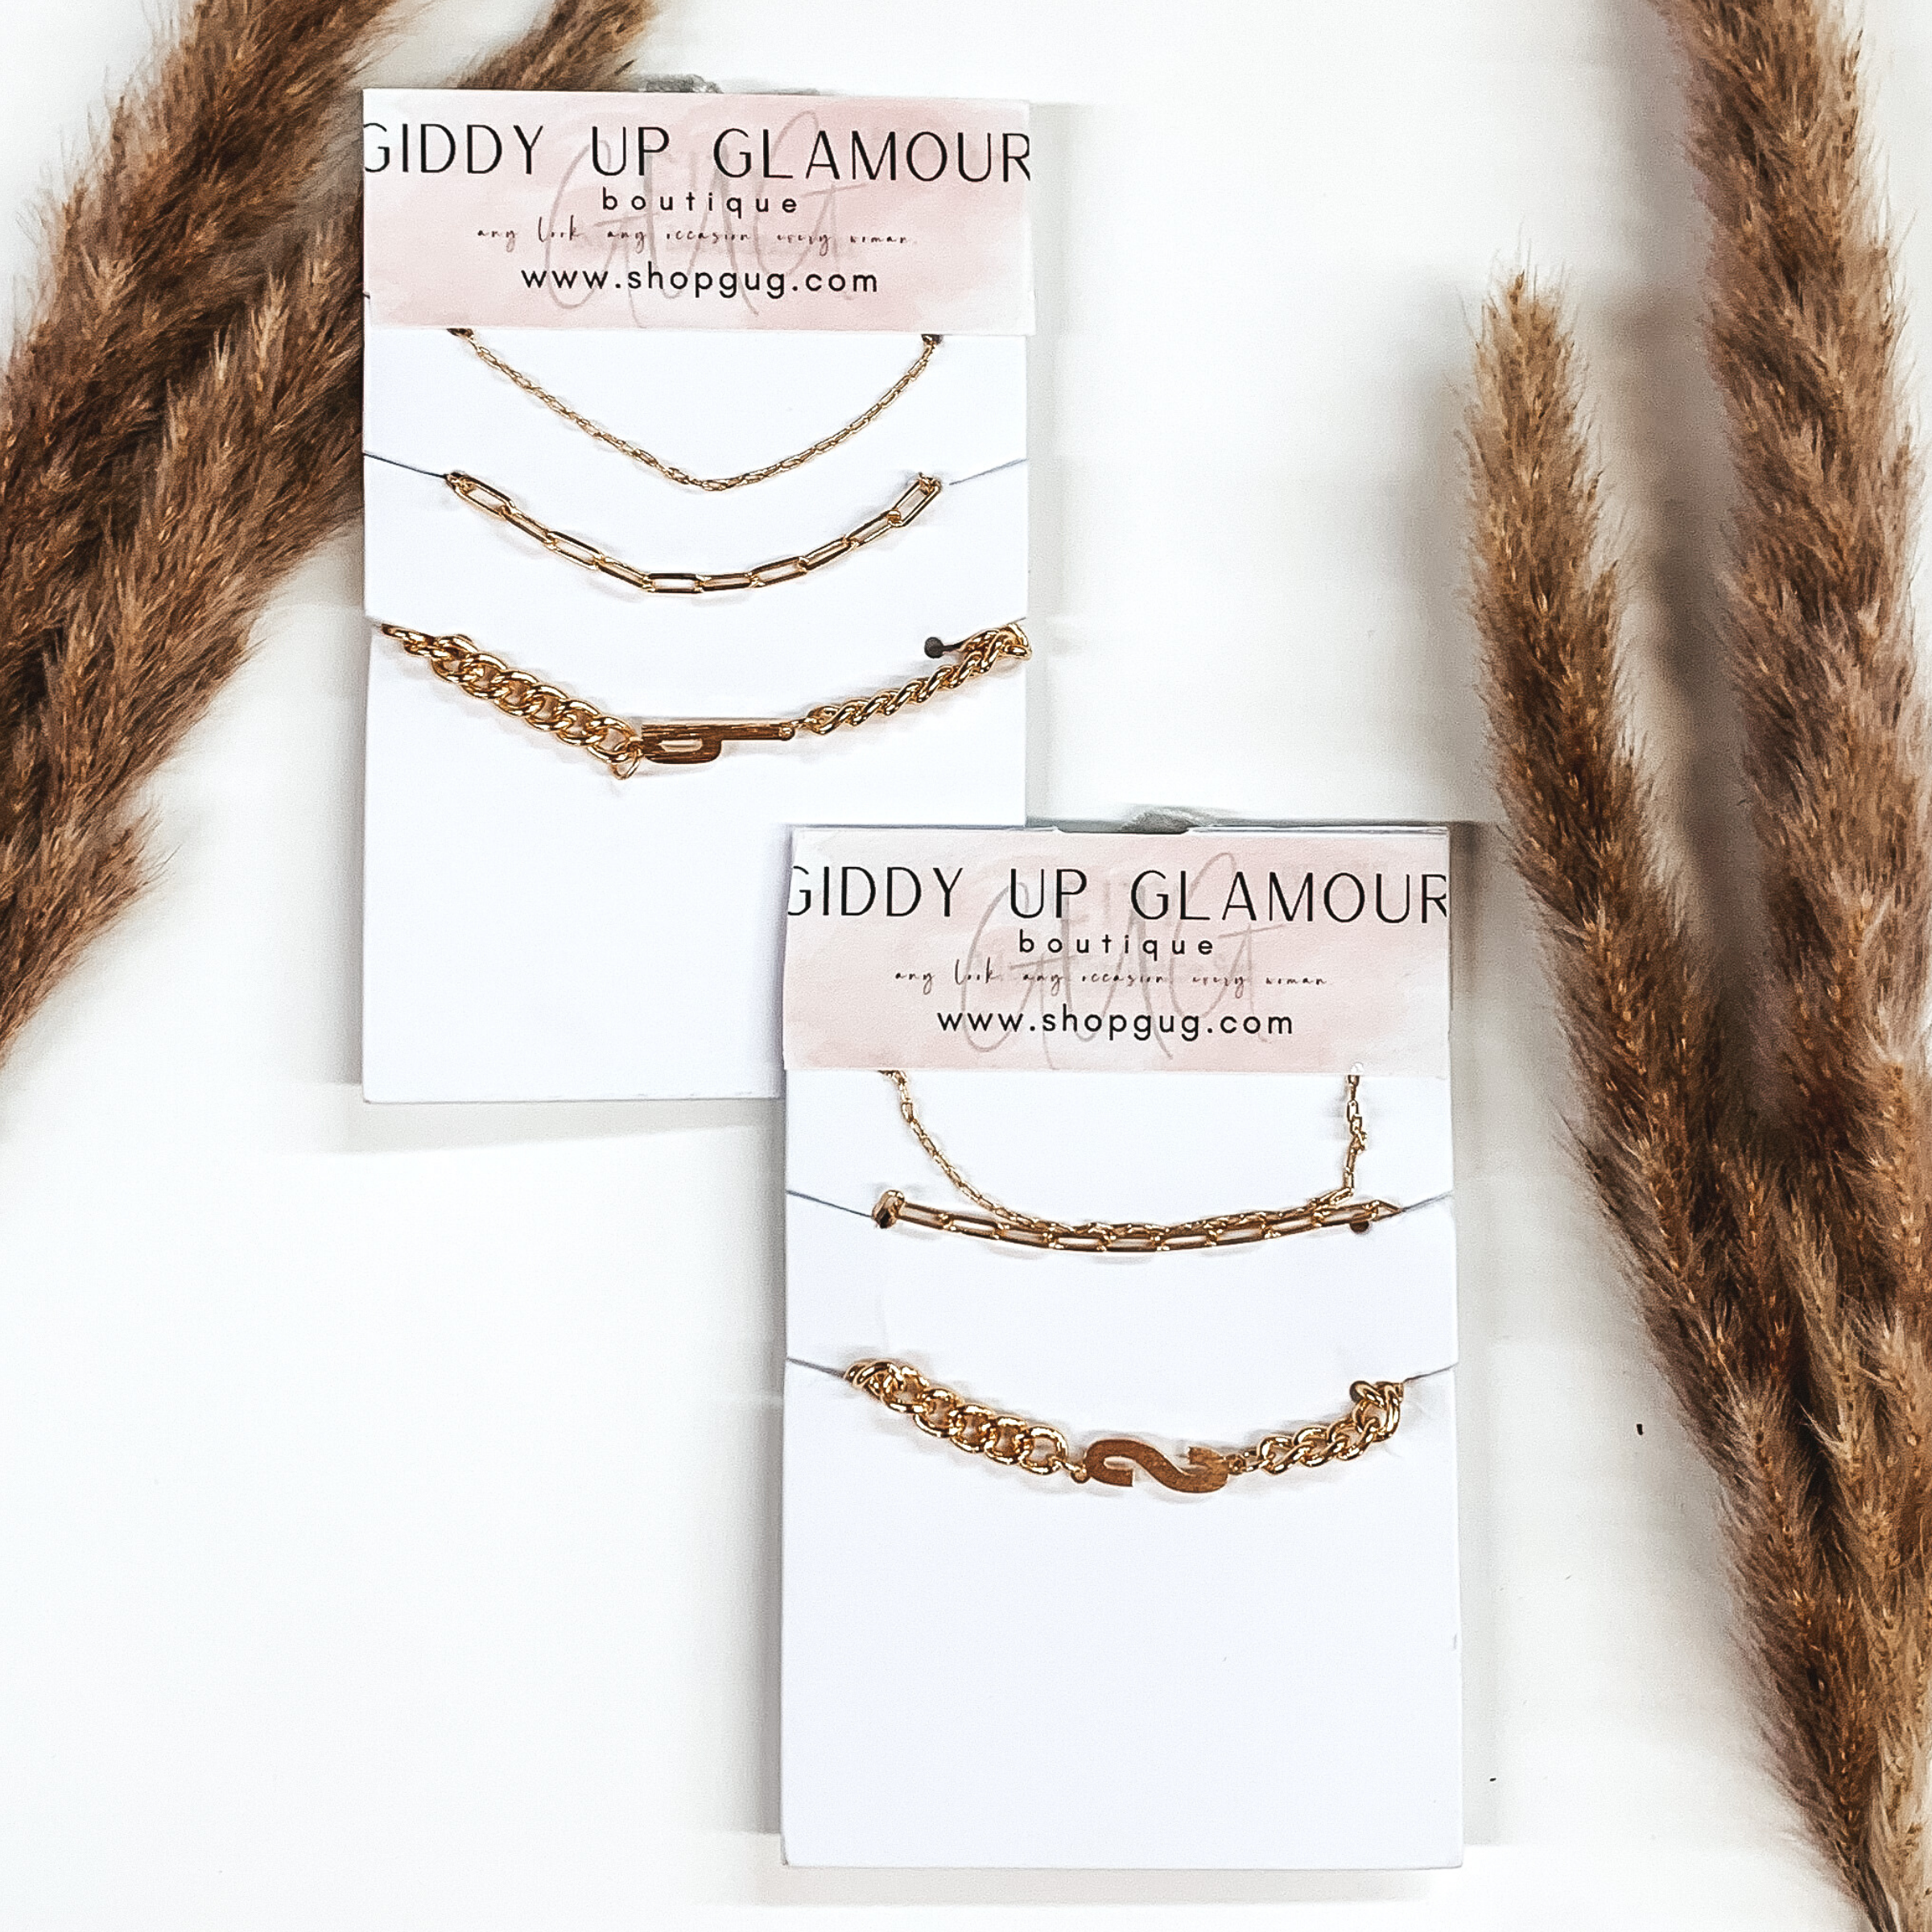 Initial Multi Chained Necklace Set in Gold - Giddy Up Glamour Boutique